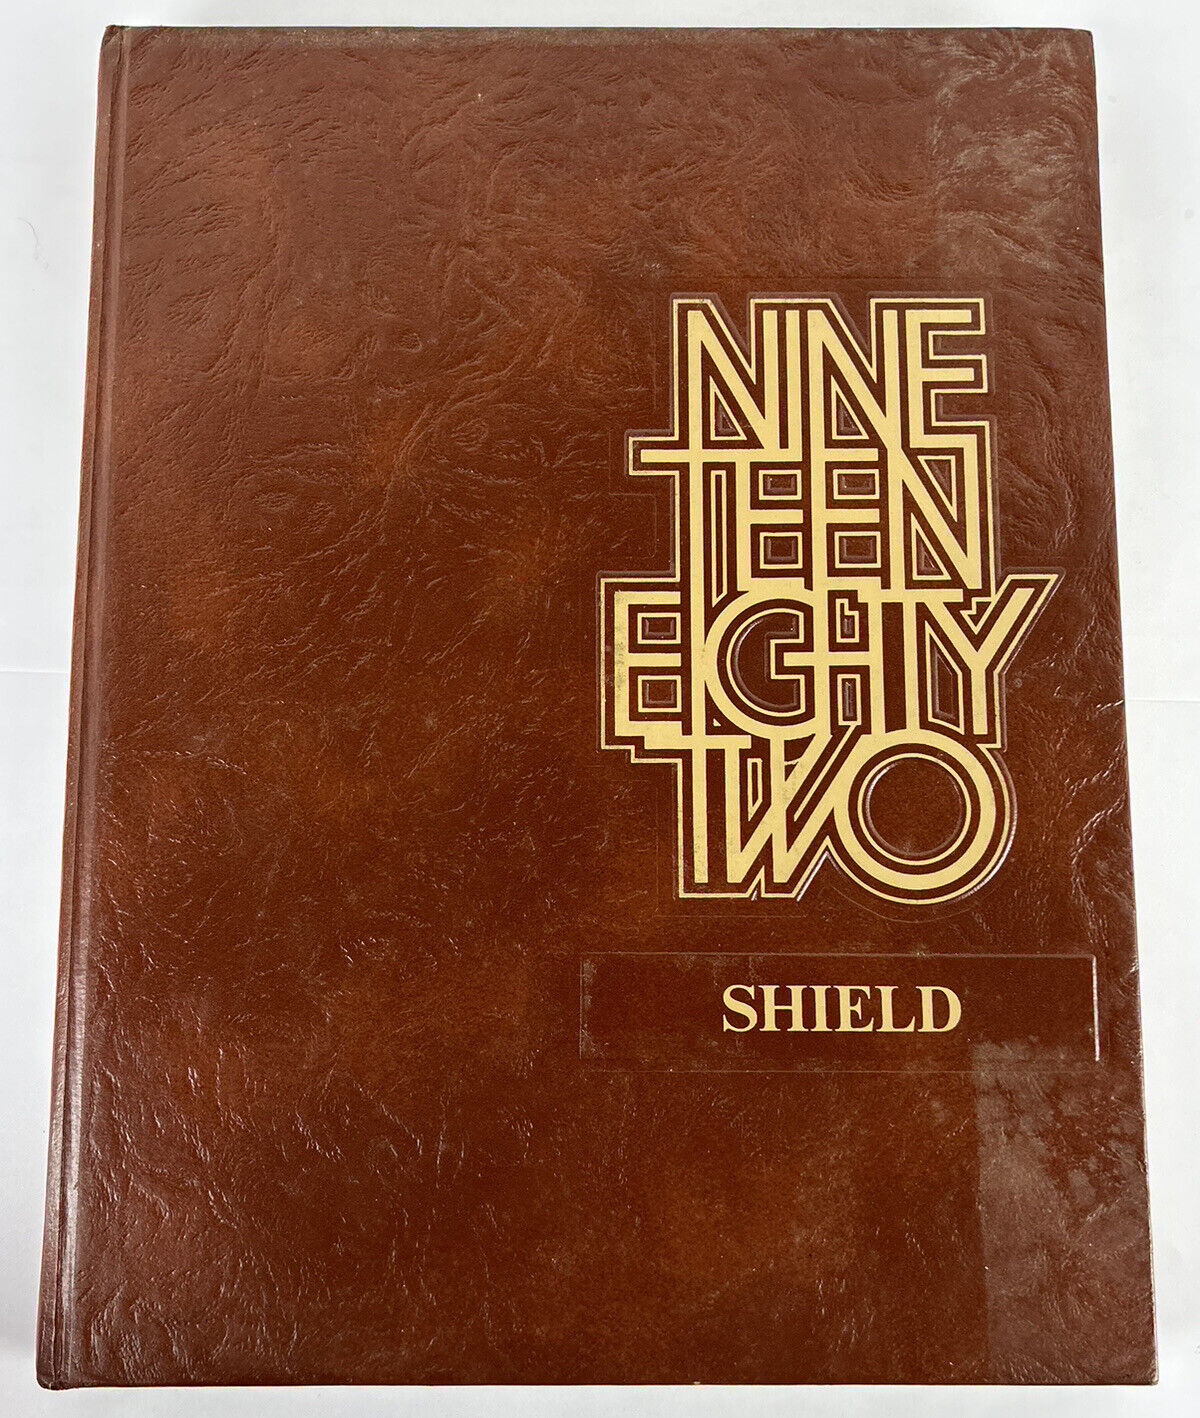 1982 The Shield Lord Botetourt High School Daleville Virginia Yearbook